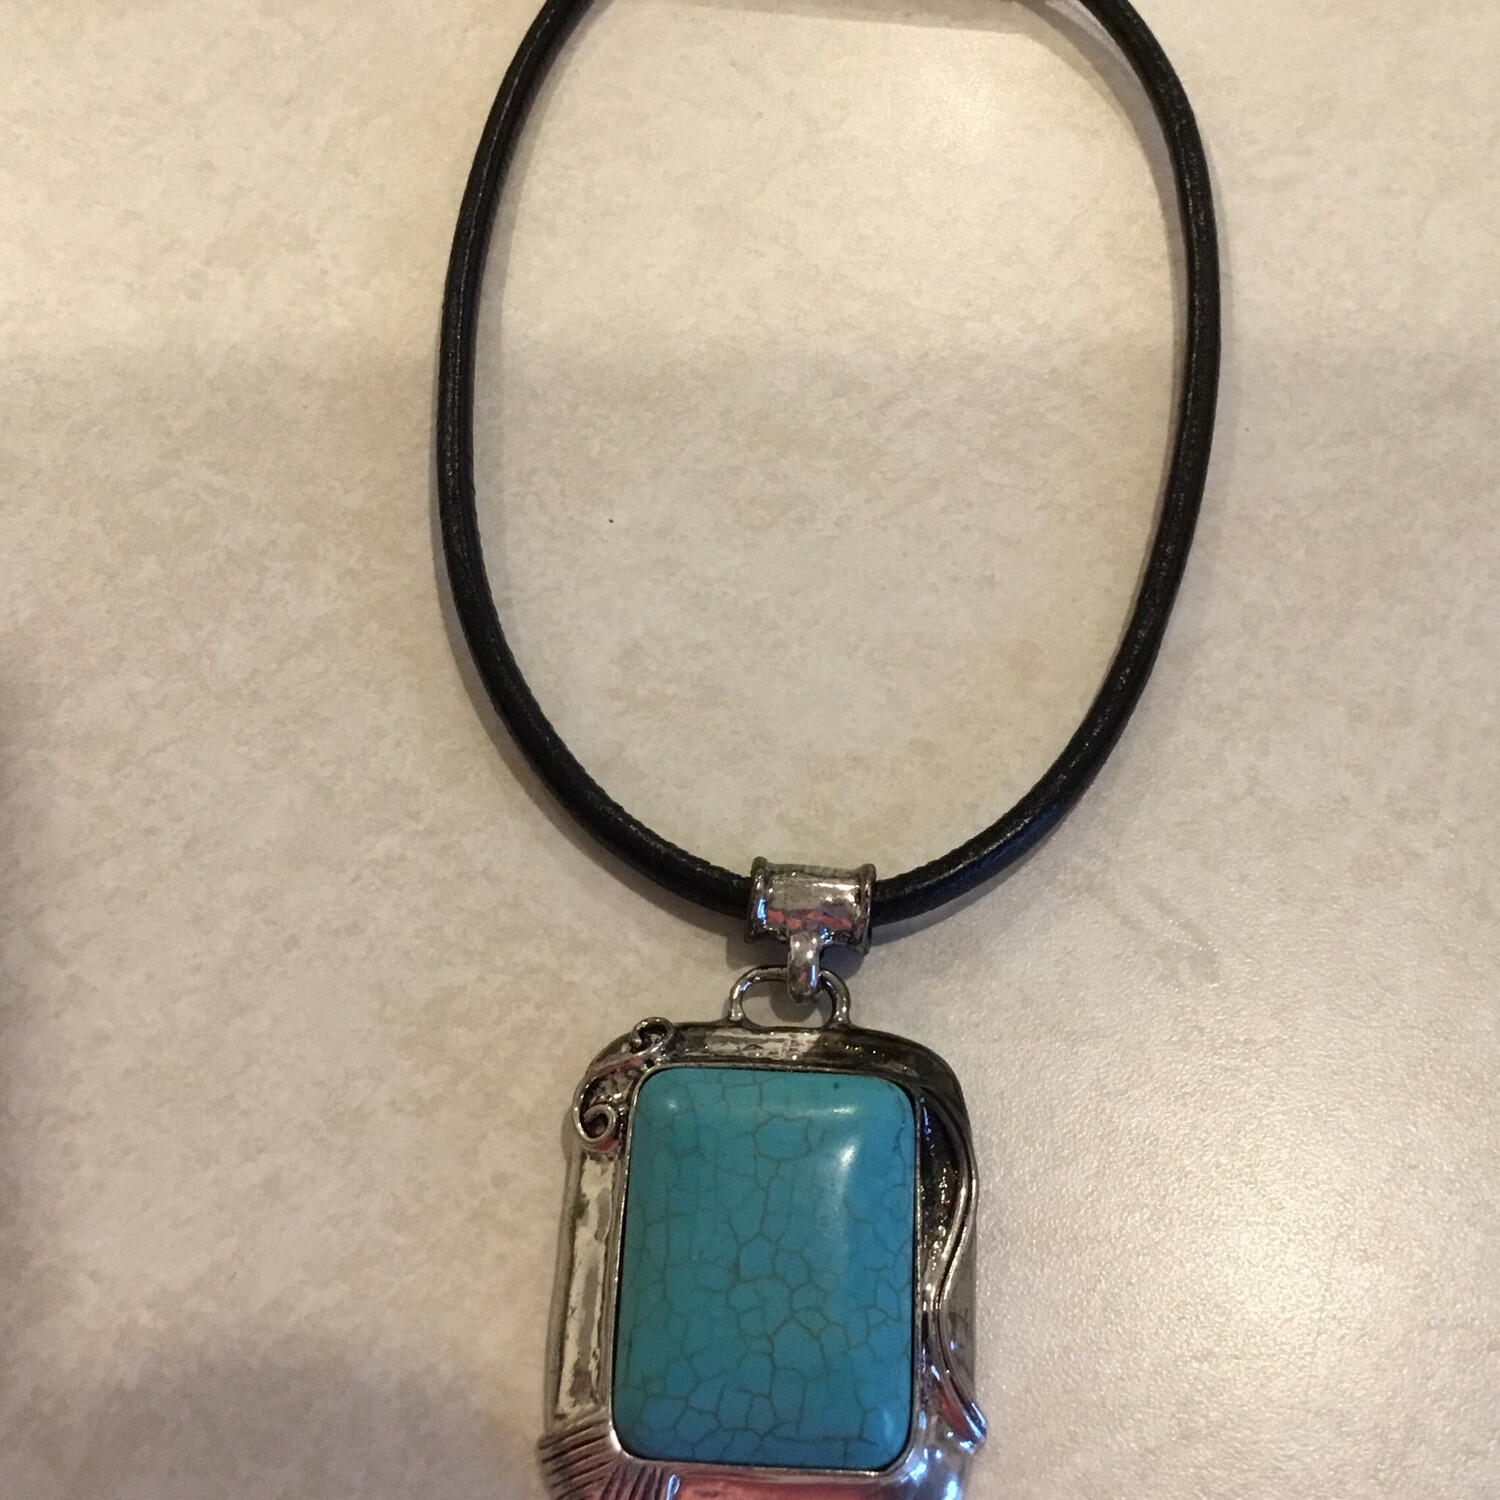 Black Leather Short Necklace With Turquoise Pendant